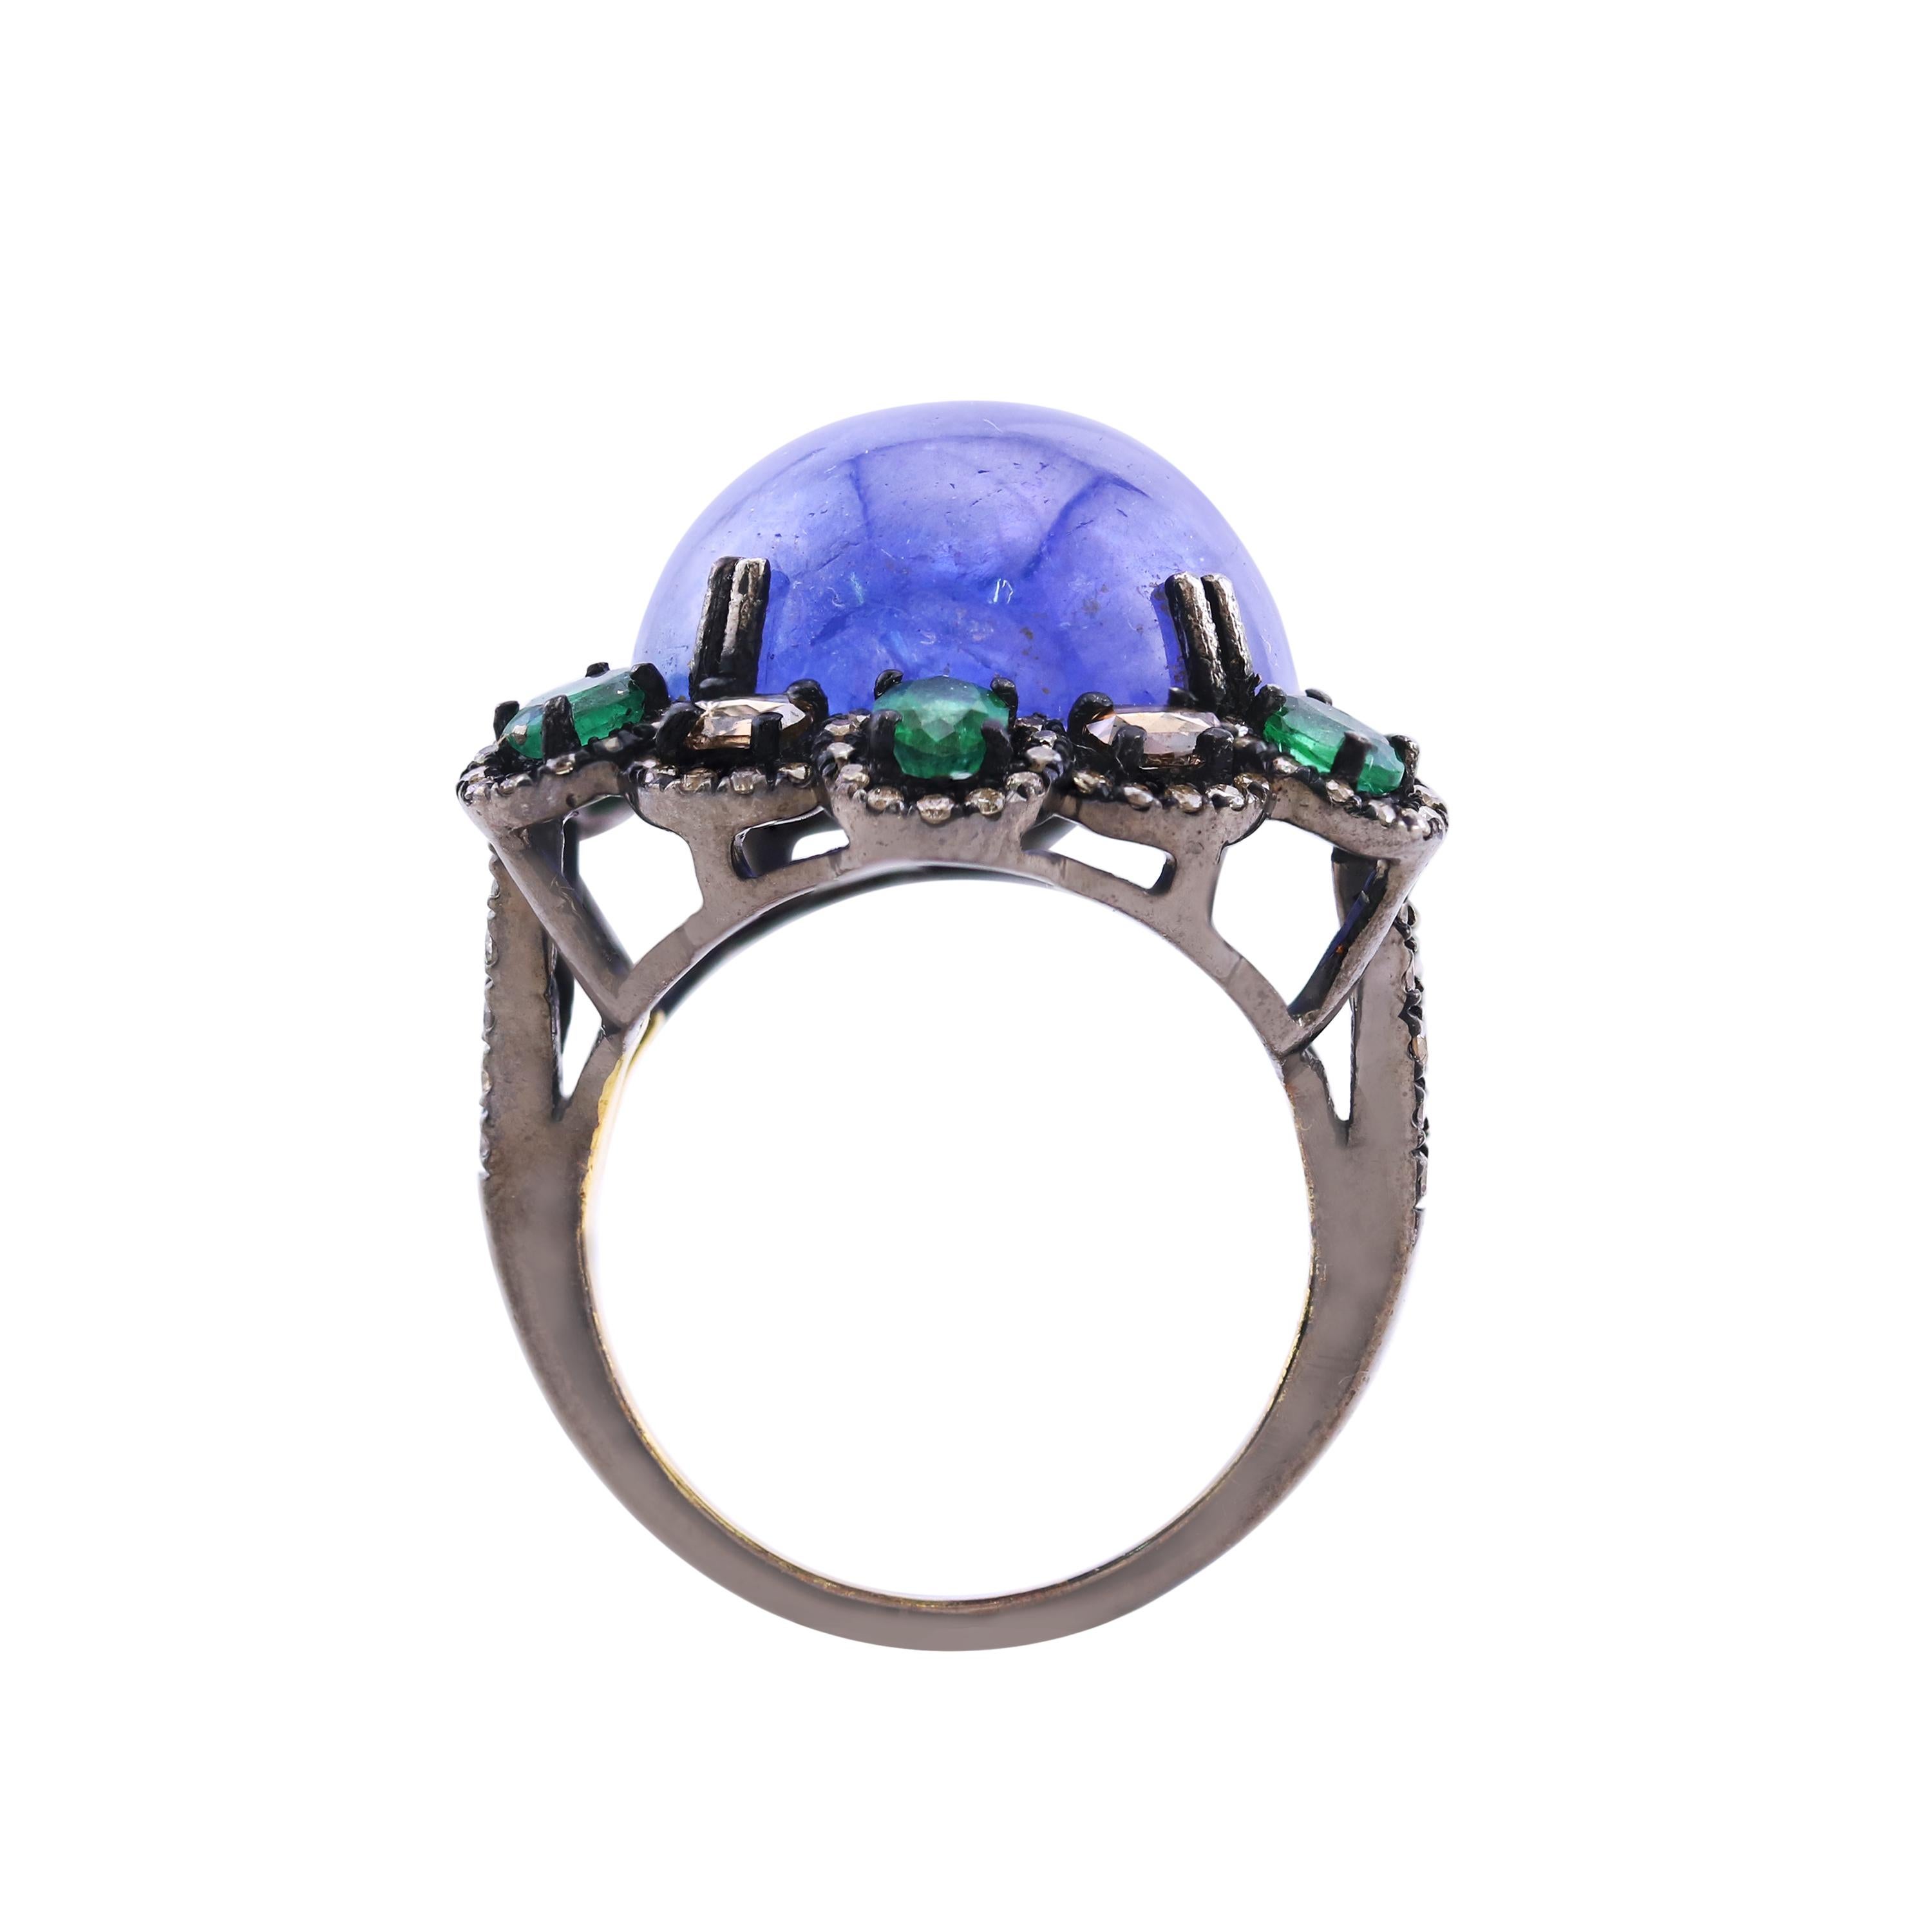  Tanzanite, Emerald Victorian Floral Ring with Diamond In 18K/925 White Gold  In New Condition For Sale In New York, NY